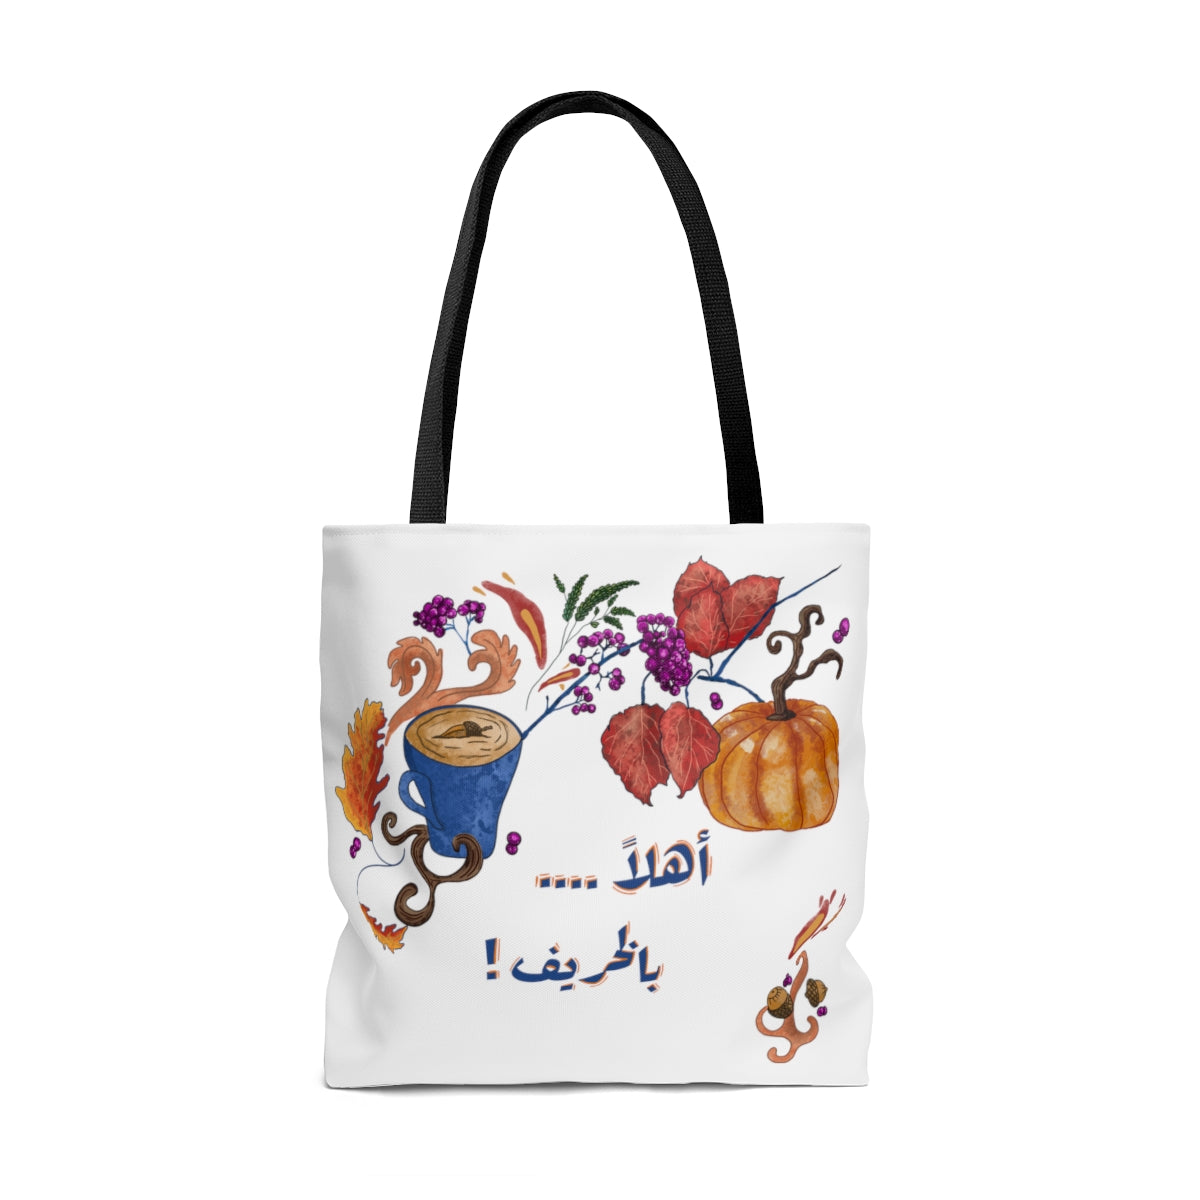 Welcome Autumn/اهلا بالخريف- AOP Tote Bag - Arabic and English